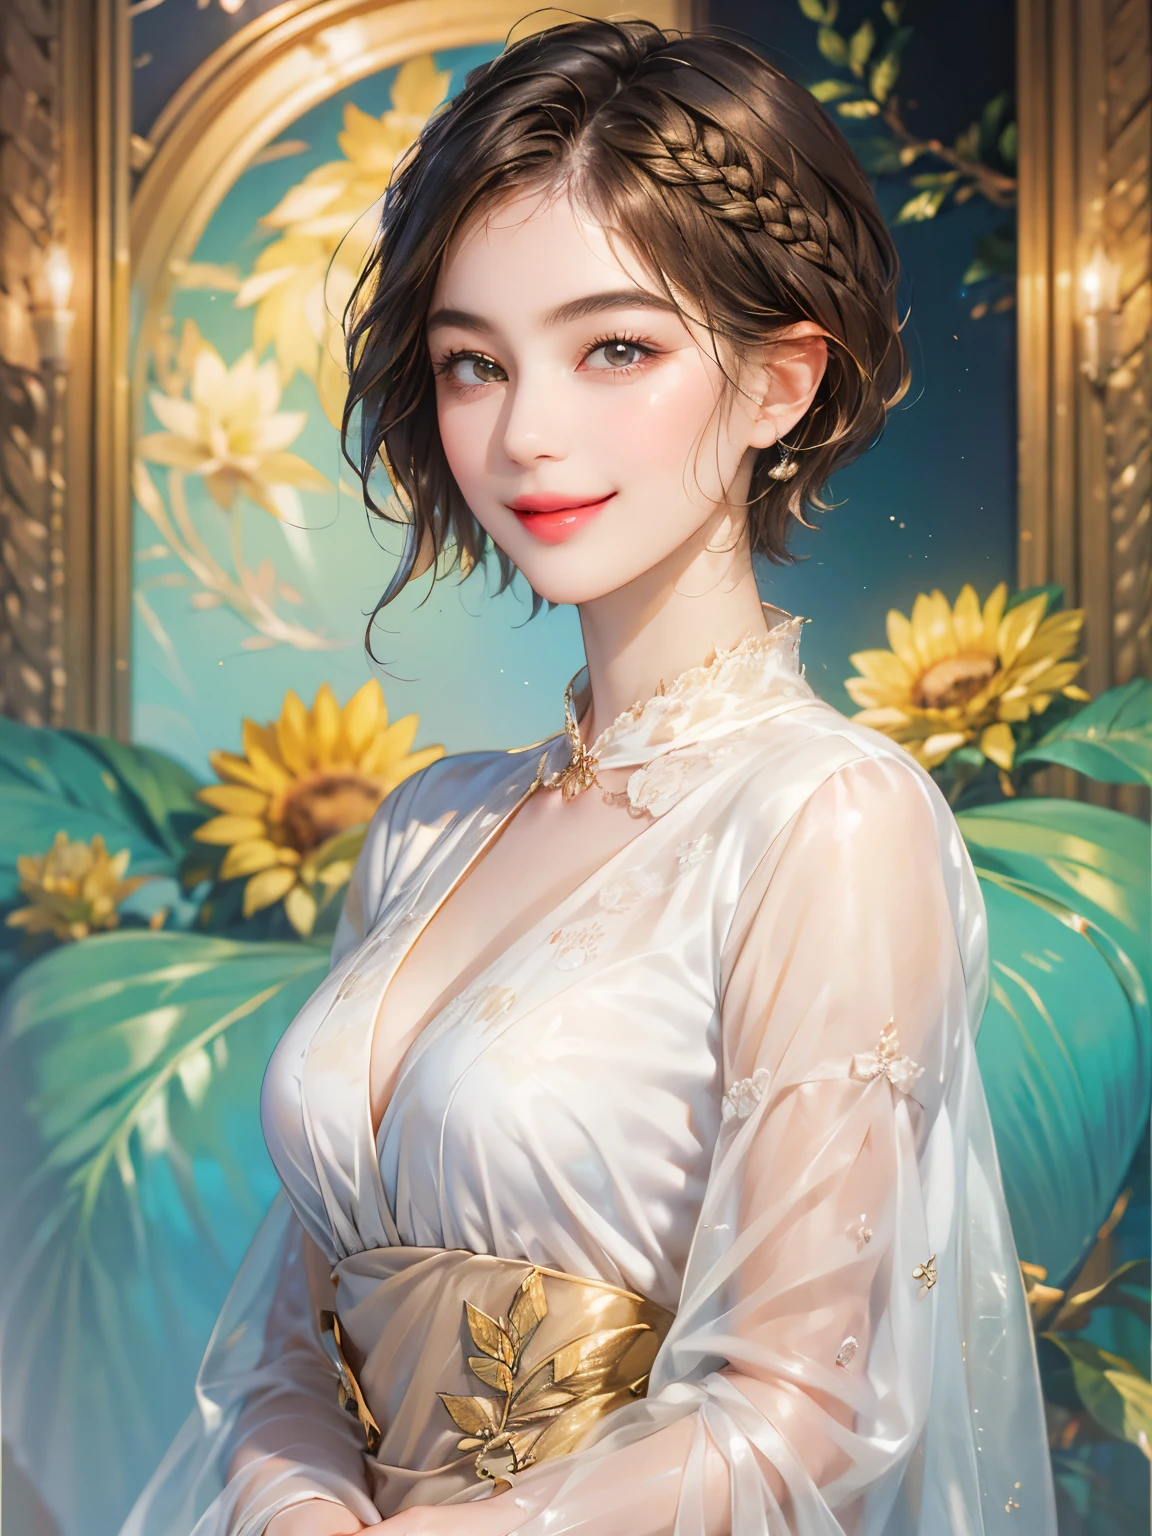 143
(a 20 yo woman), (A hyper-realistic), (high-level image quality), ((beautiful hairstyle 46)), ((short-hair:1.46)), (kindly smile), (breasted:1.1), (lipsticks)